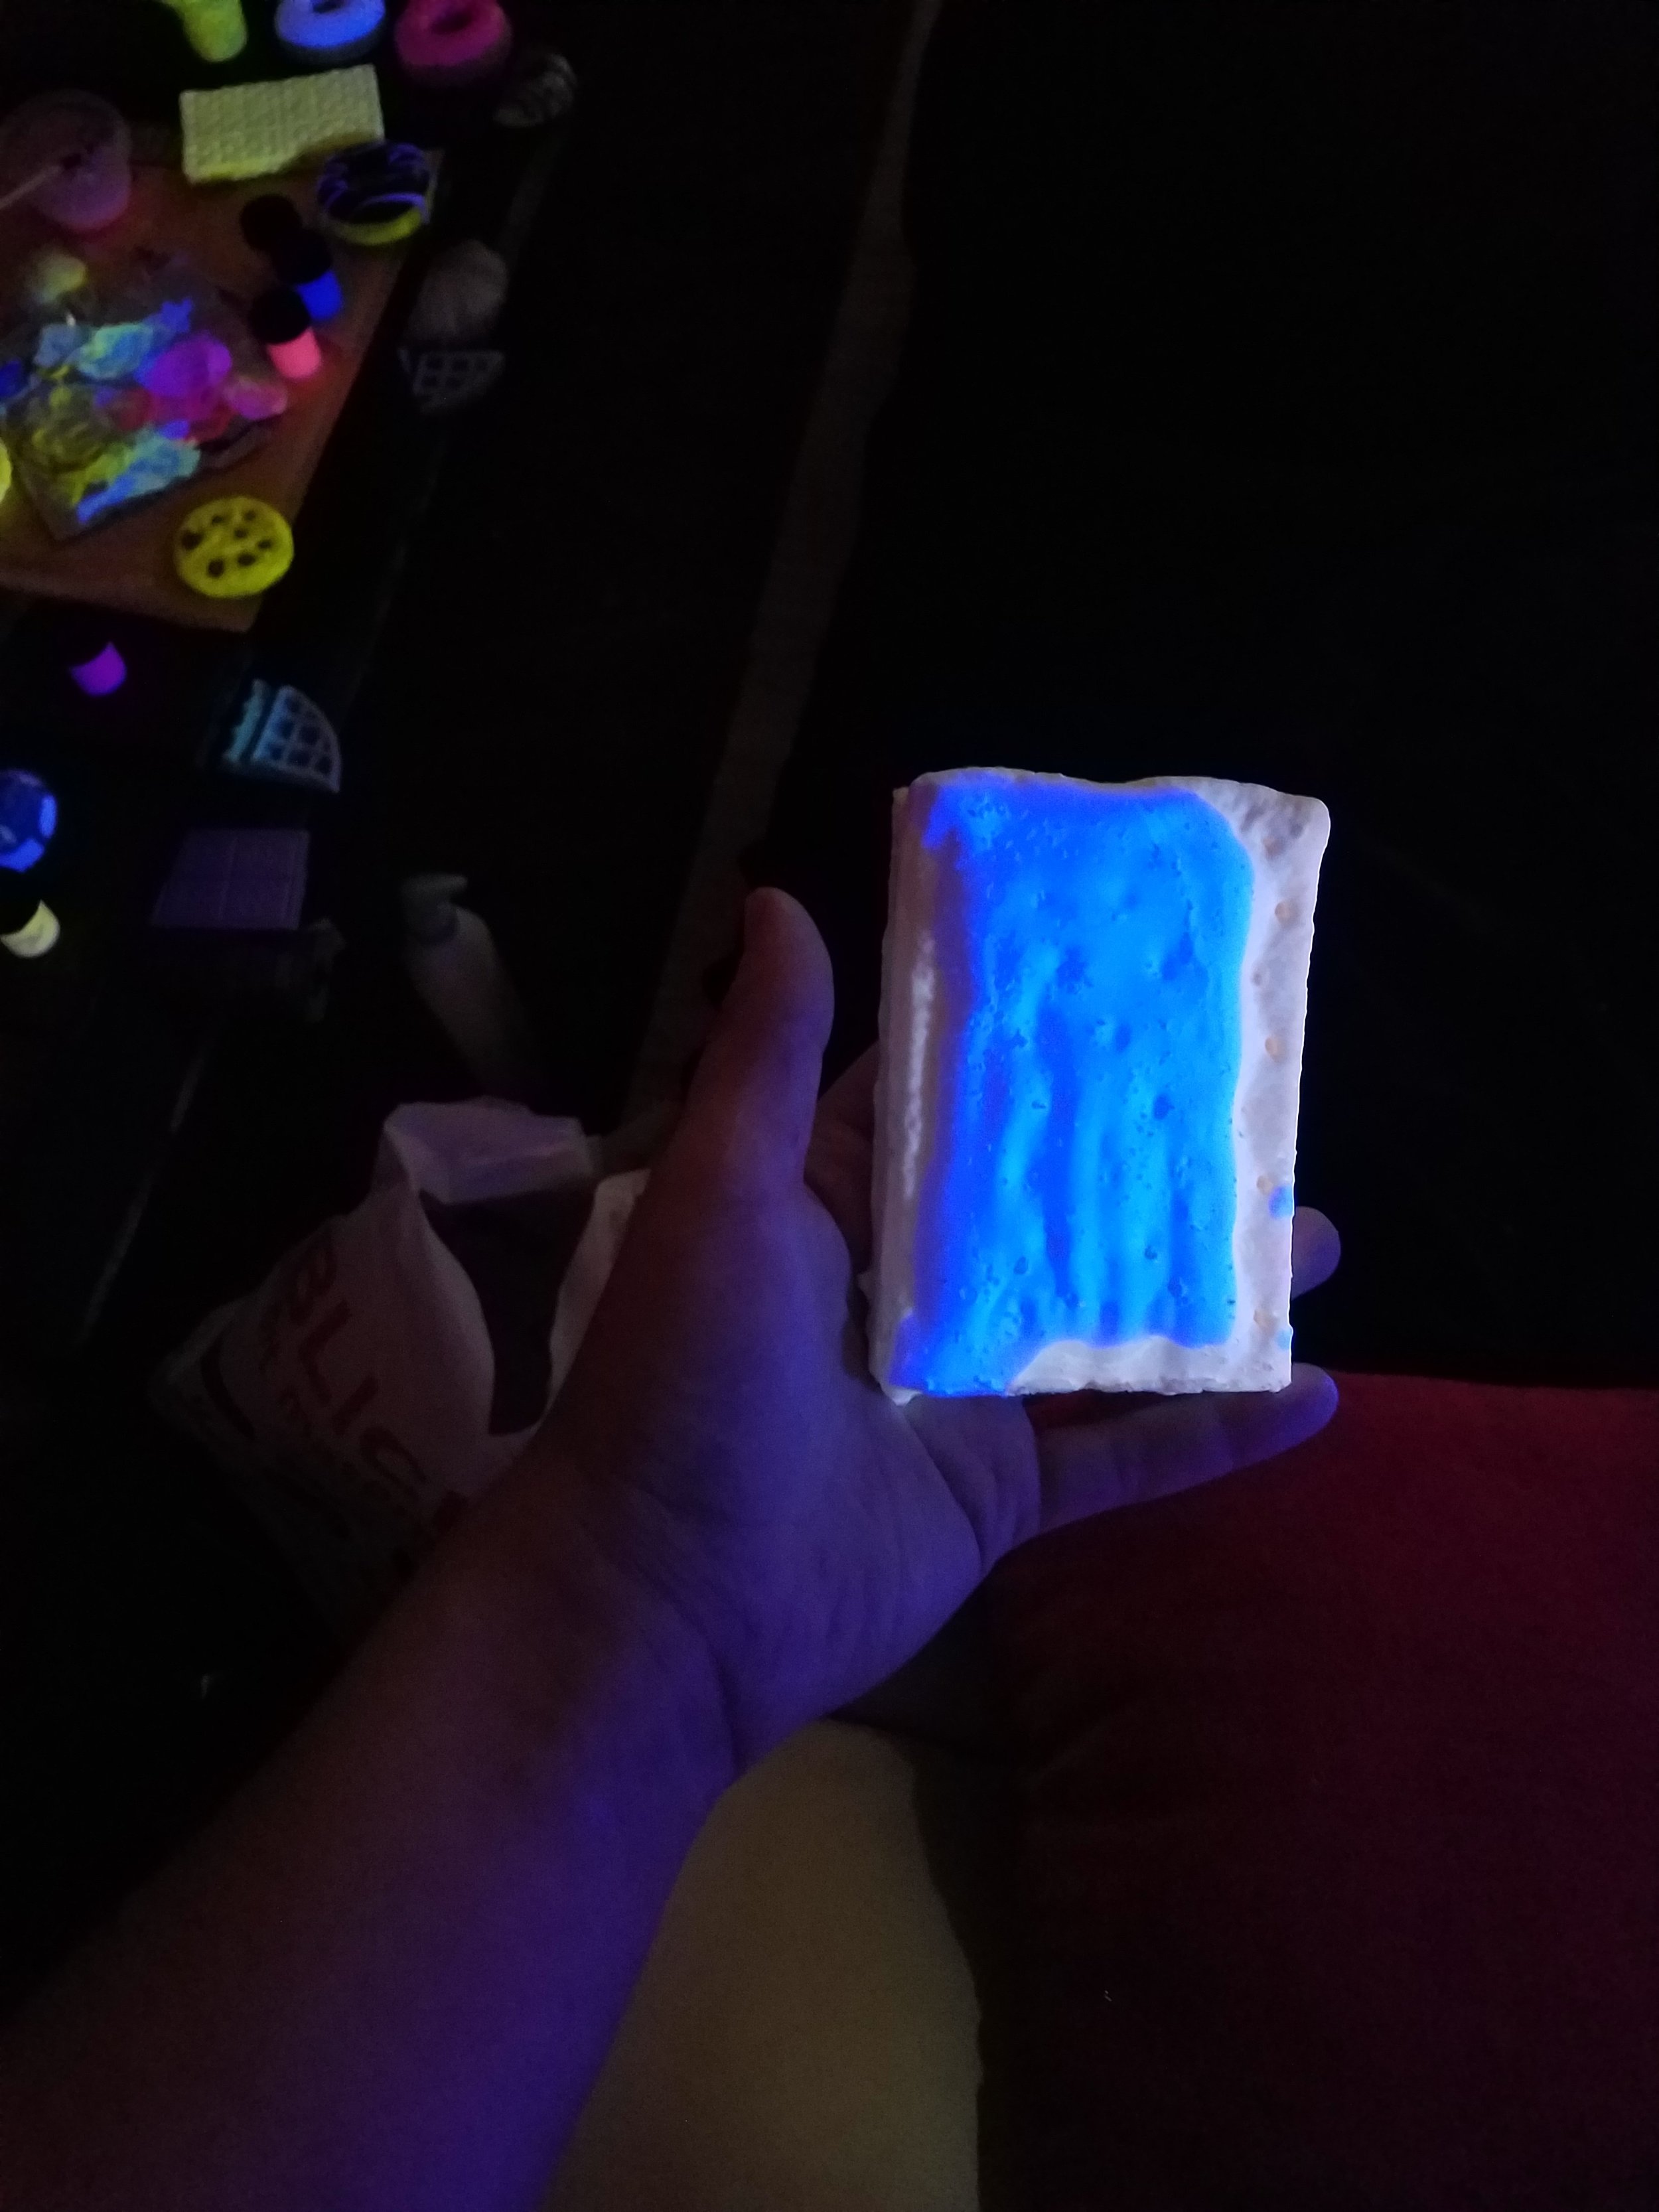  Pop-tarts and Chocolate bars were molded and cast in UV pigmented Resin 